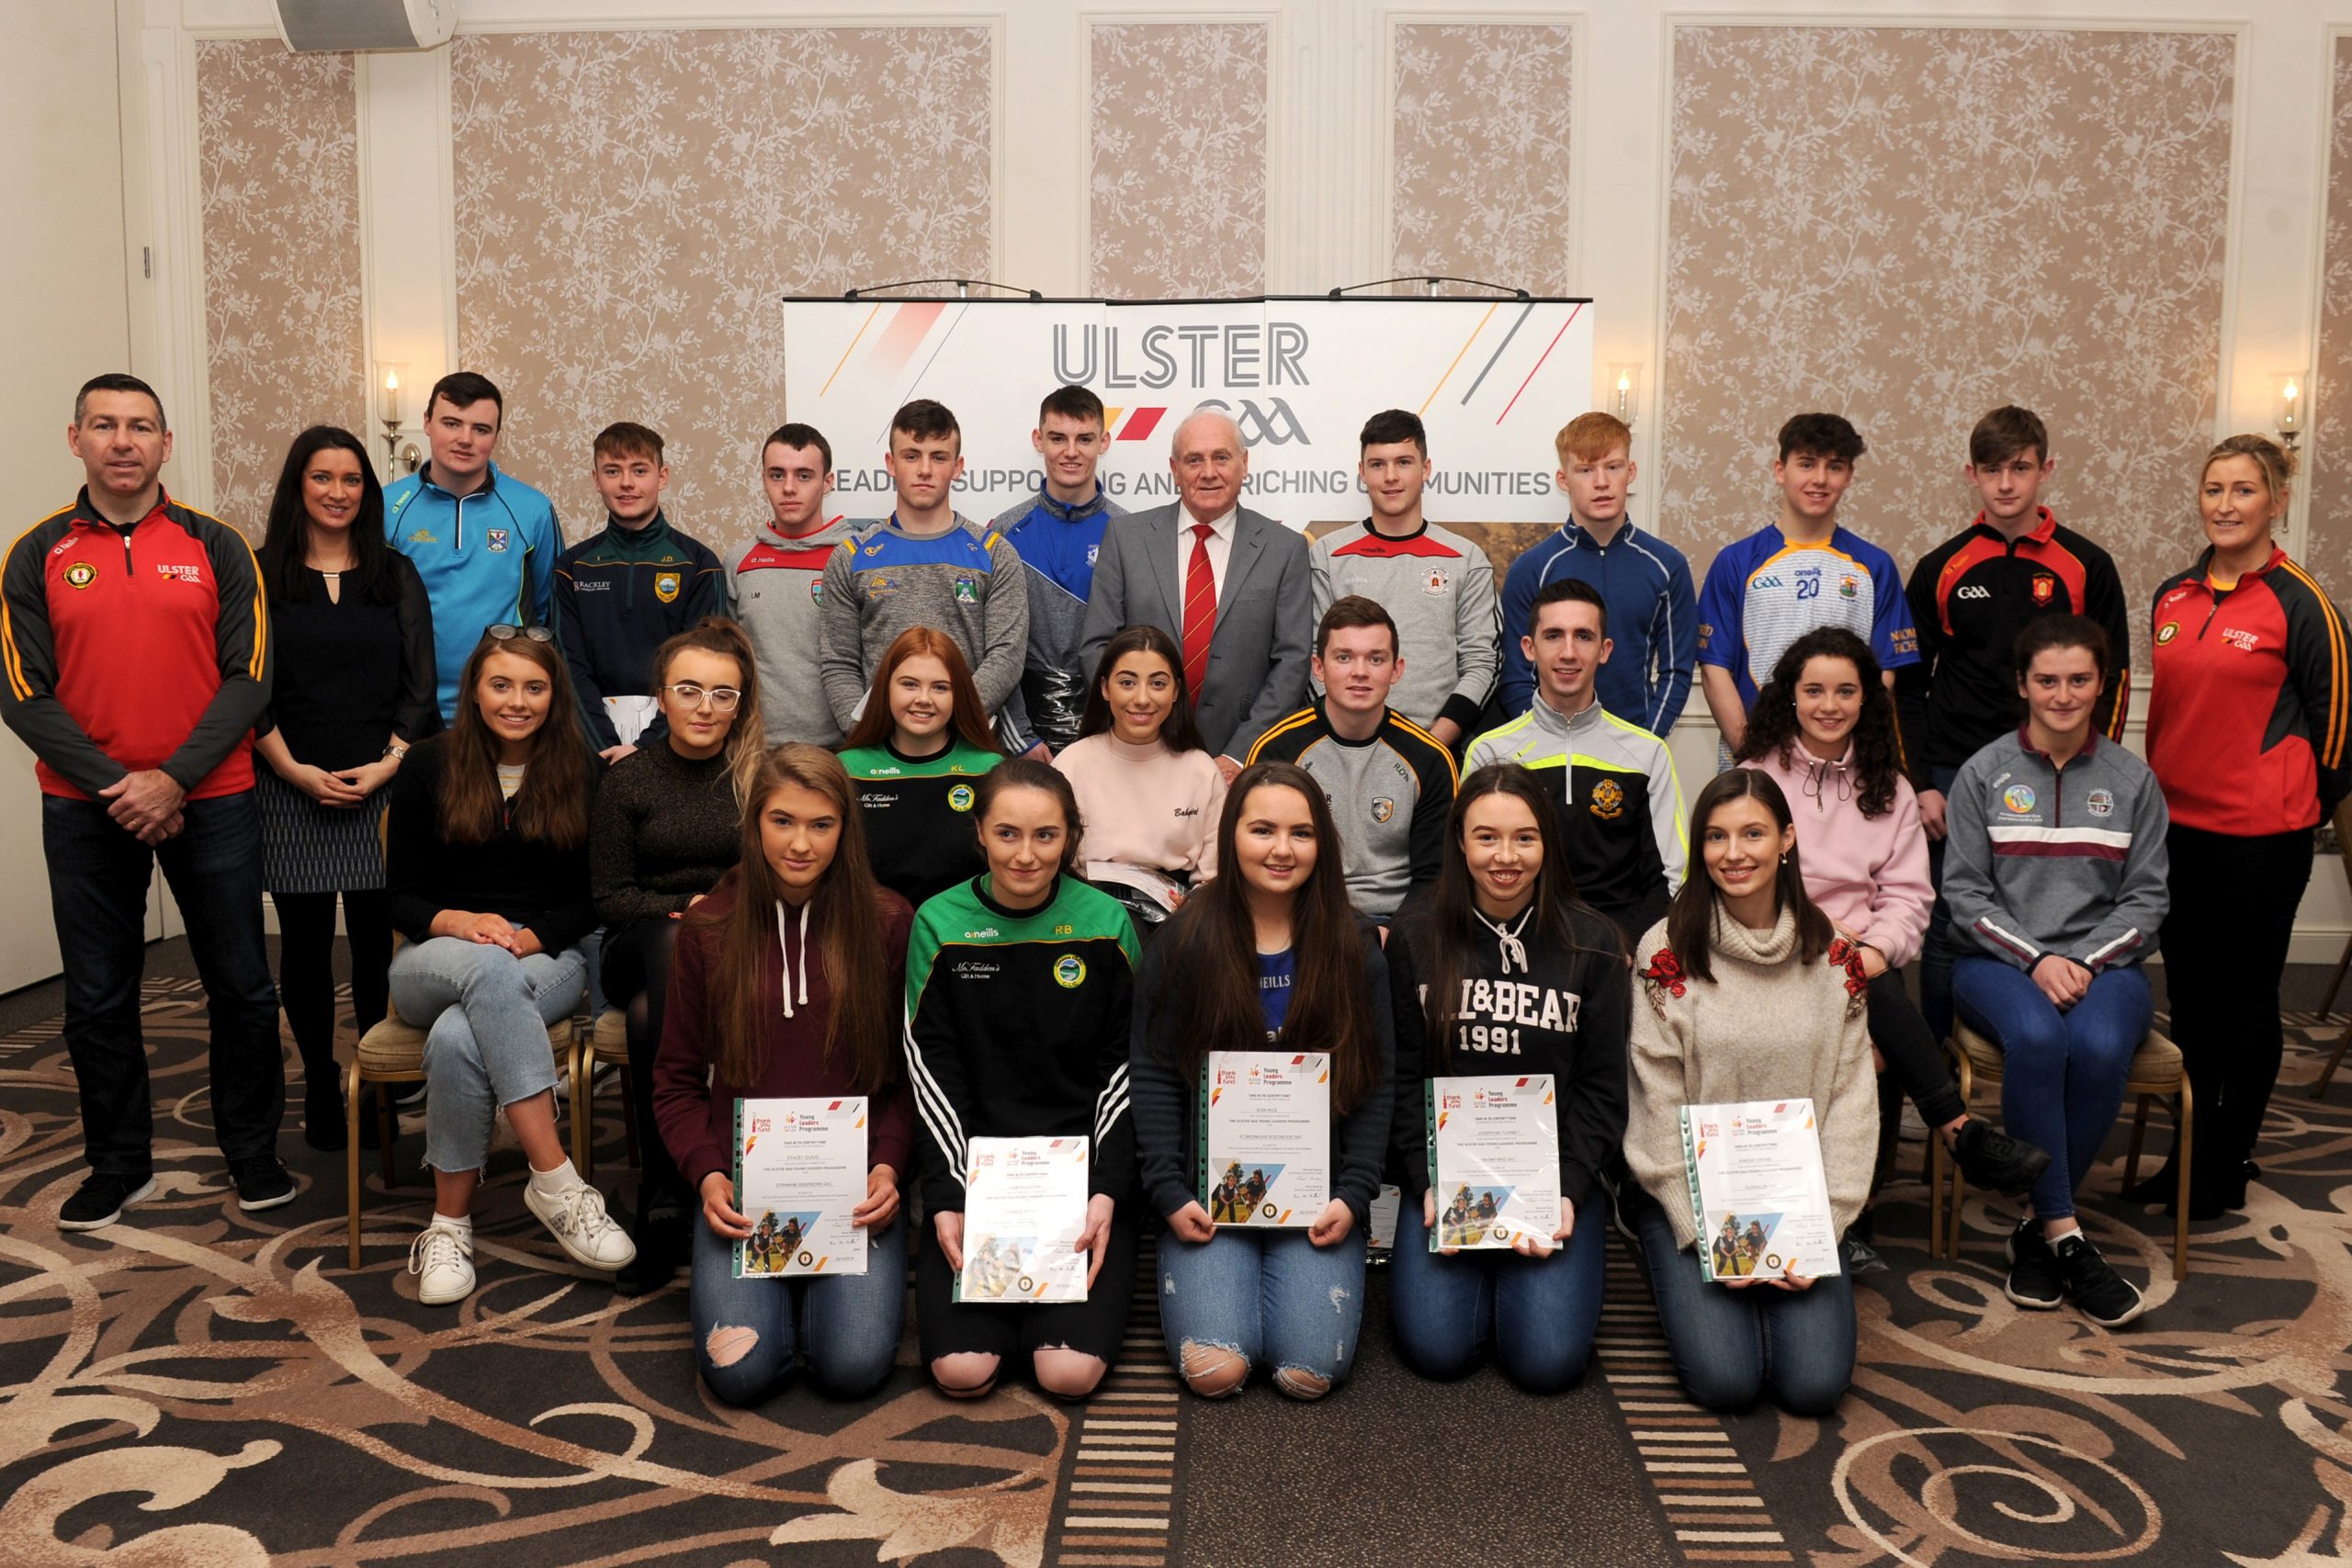 Ulster GAA recognise Young Leaders